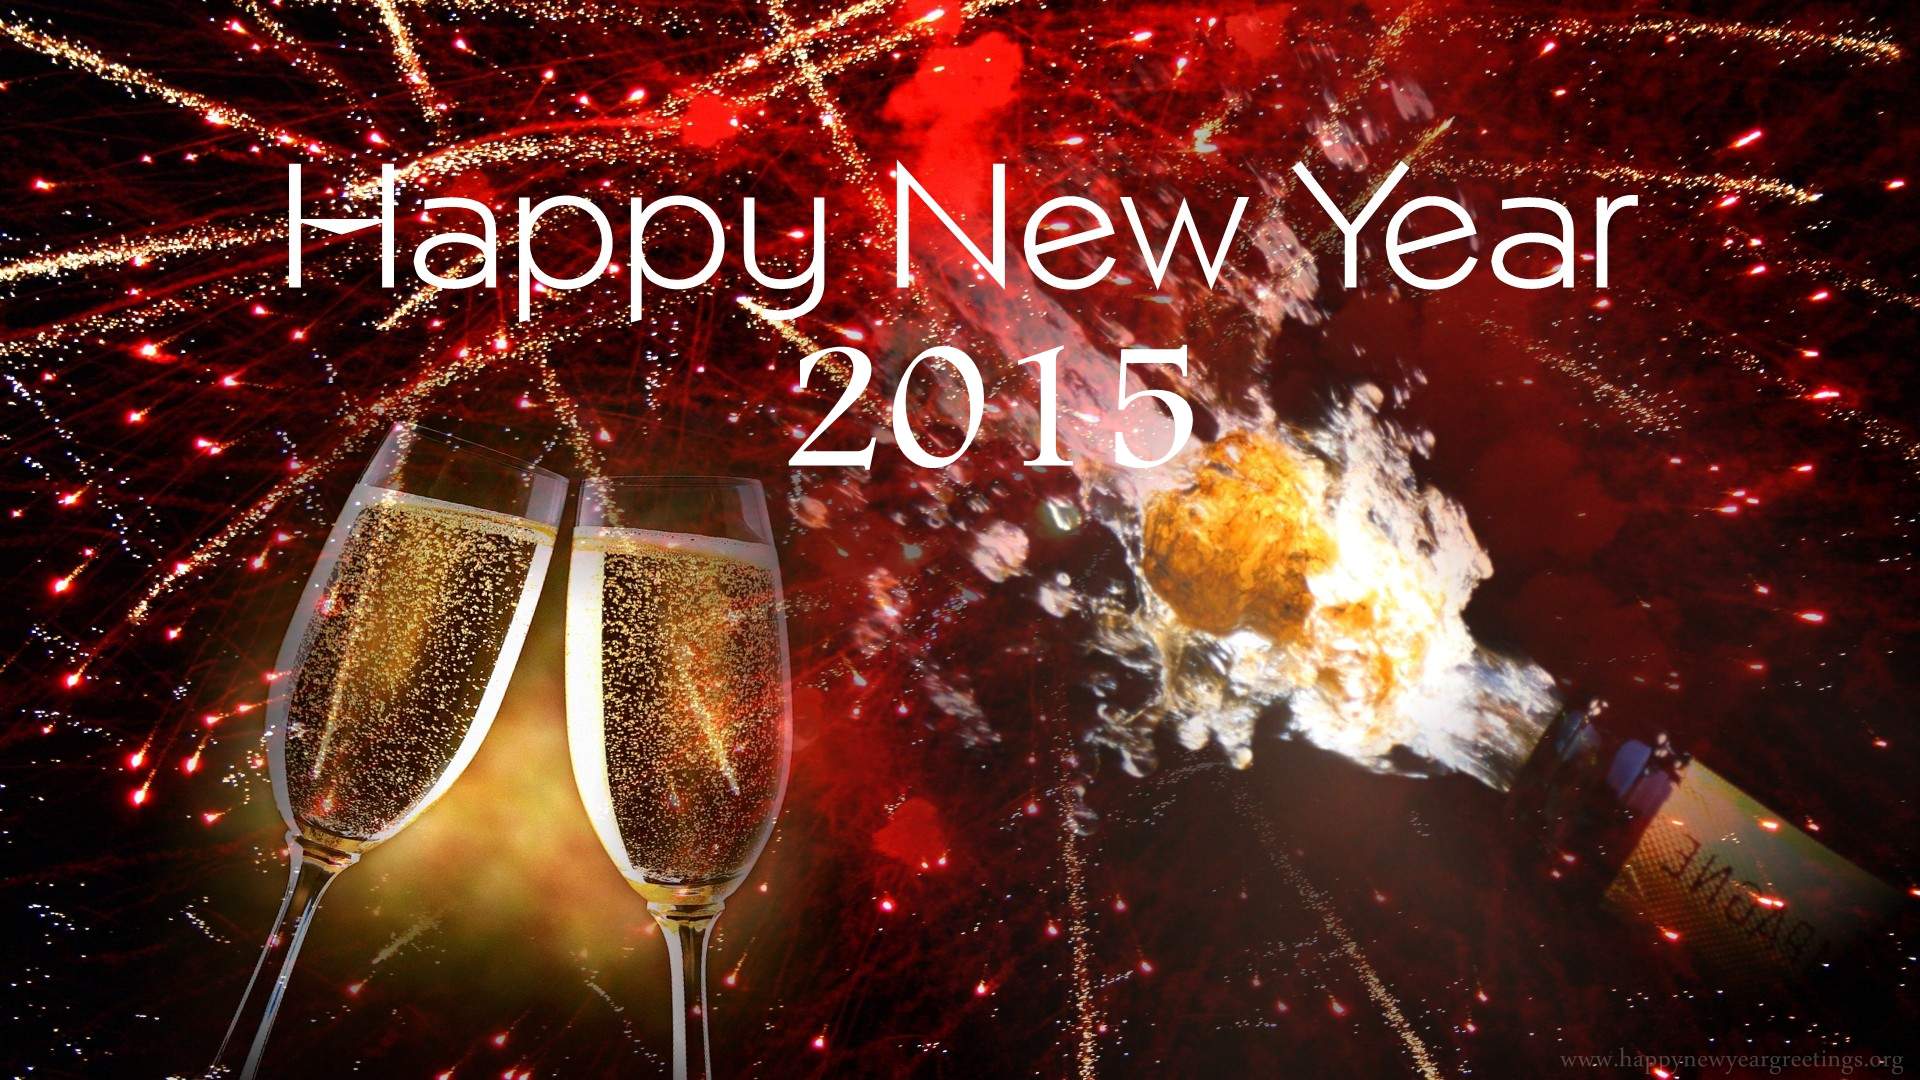 Best HD Happy New Year 2015 Wallpapers For Your Desktop PC.